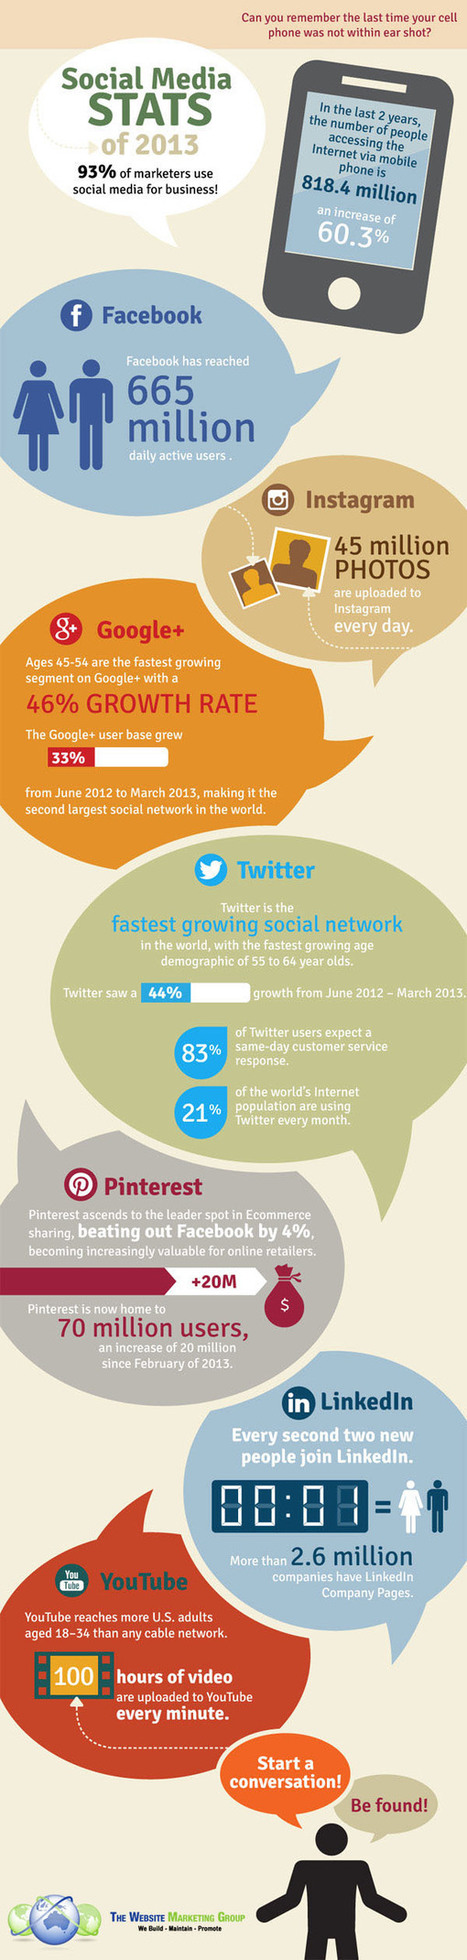 Social Media Infographic 2013 : Which platform is growing the fastest? | Information Technology & Social Media News | Scoop.it